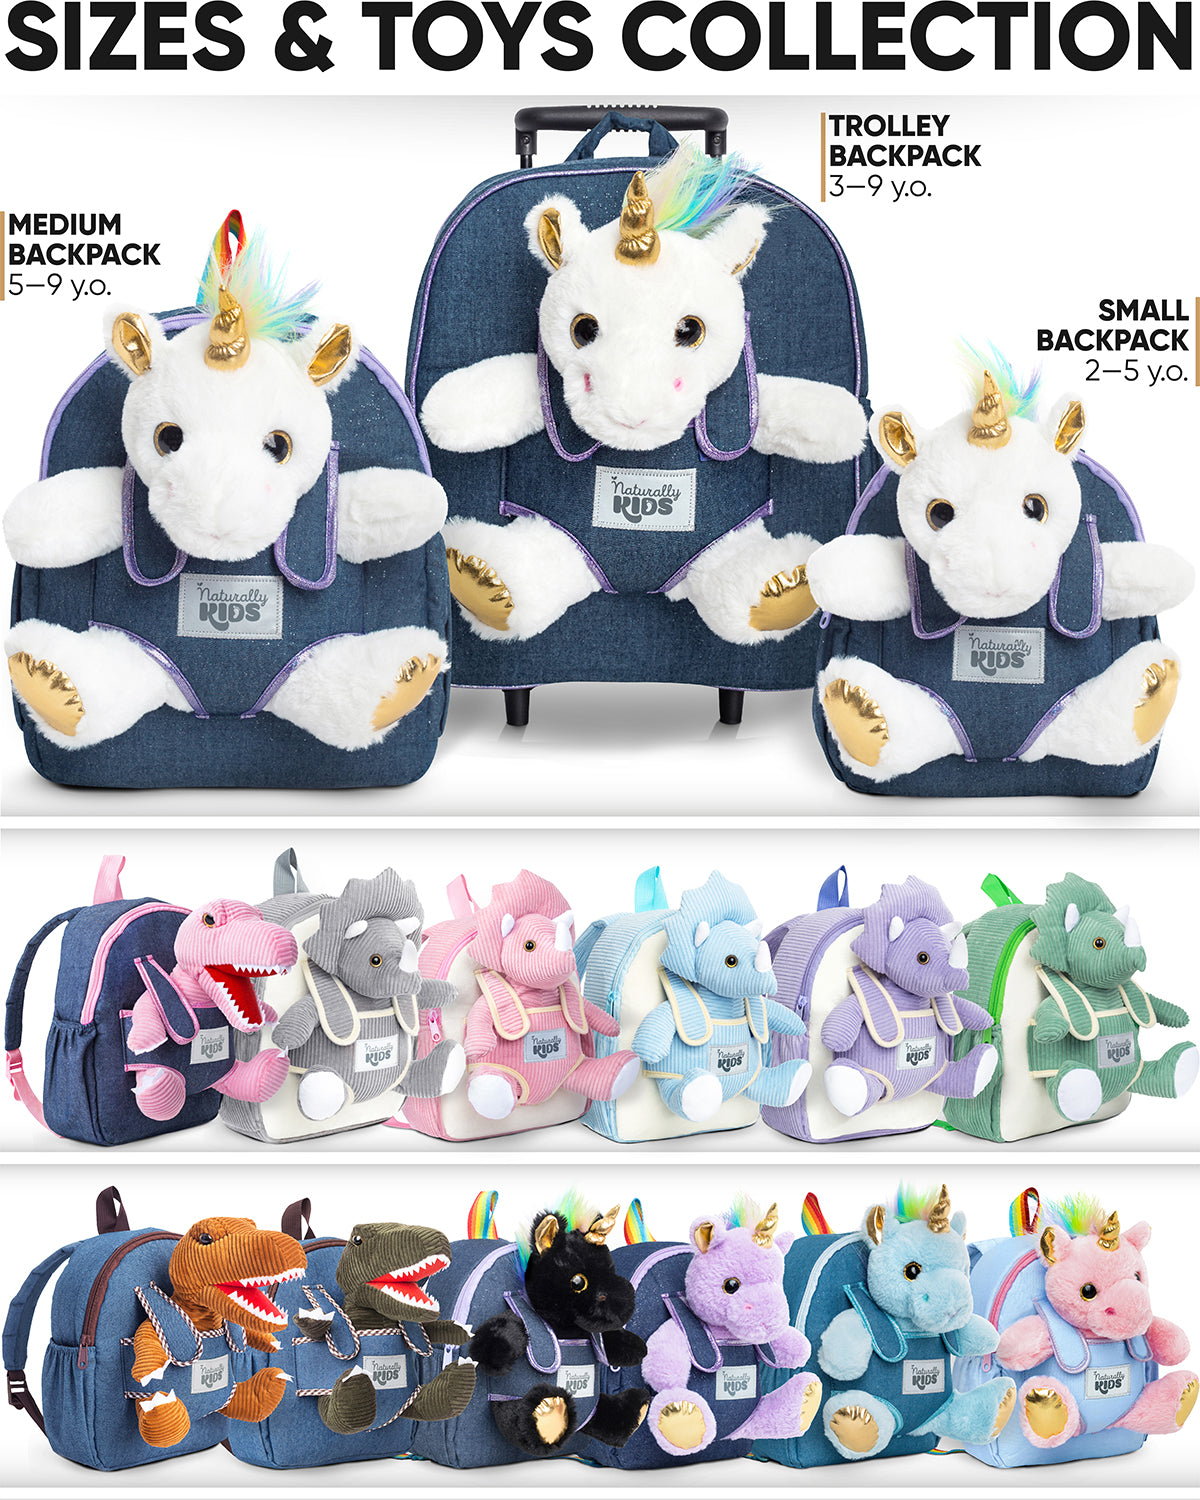 🎅🏽 Kids' Backpack with Plush Animal Toys — Christmas gifts for kids – 🦖  Naturally KIDS backpacks with plush dinosaur toys & unicorn gifts 🦄